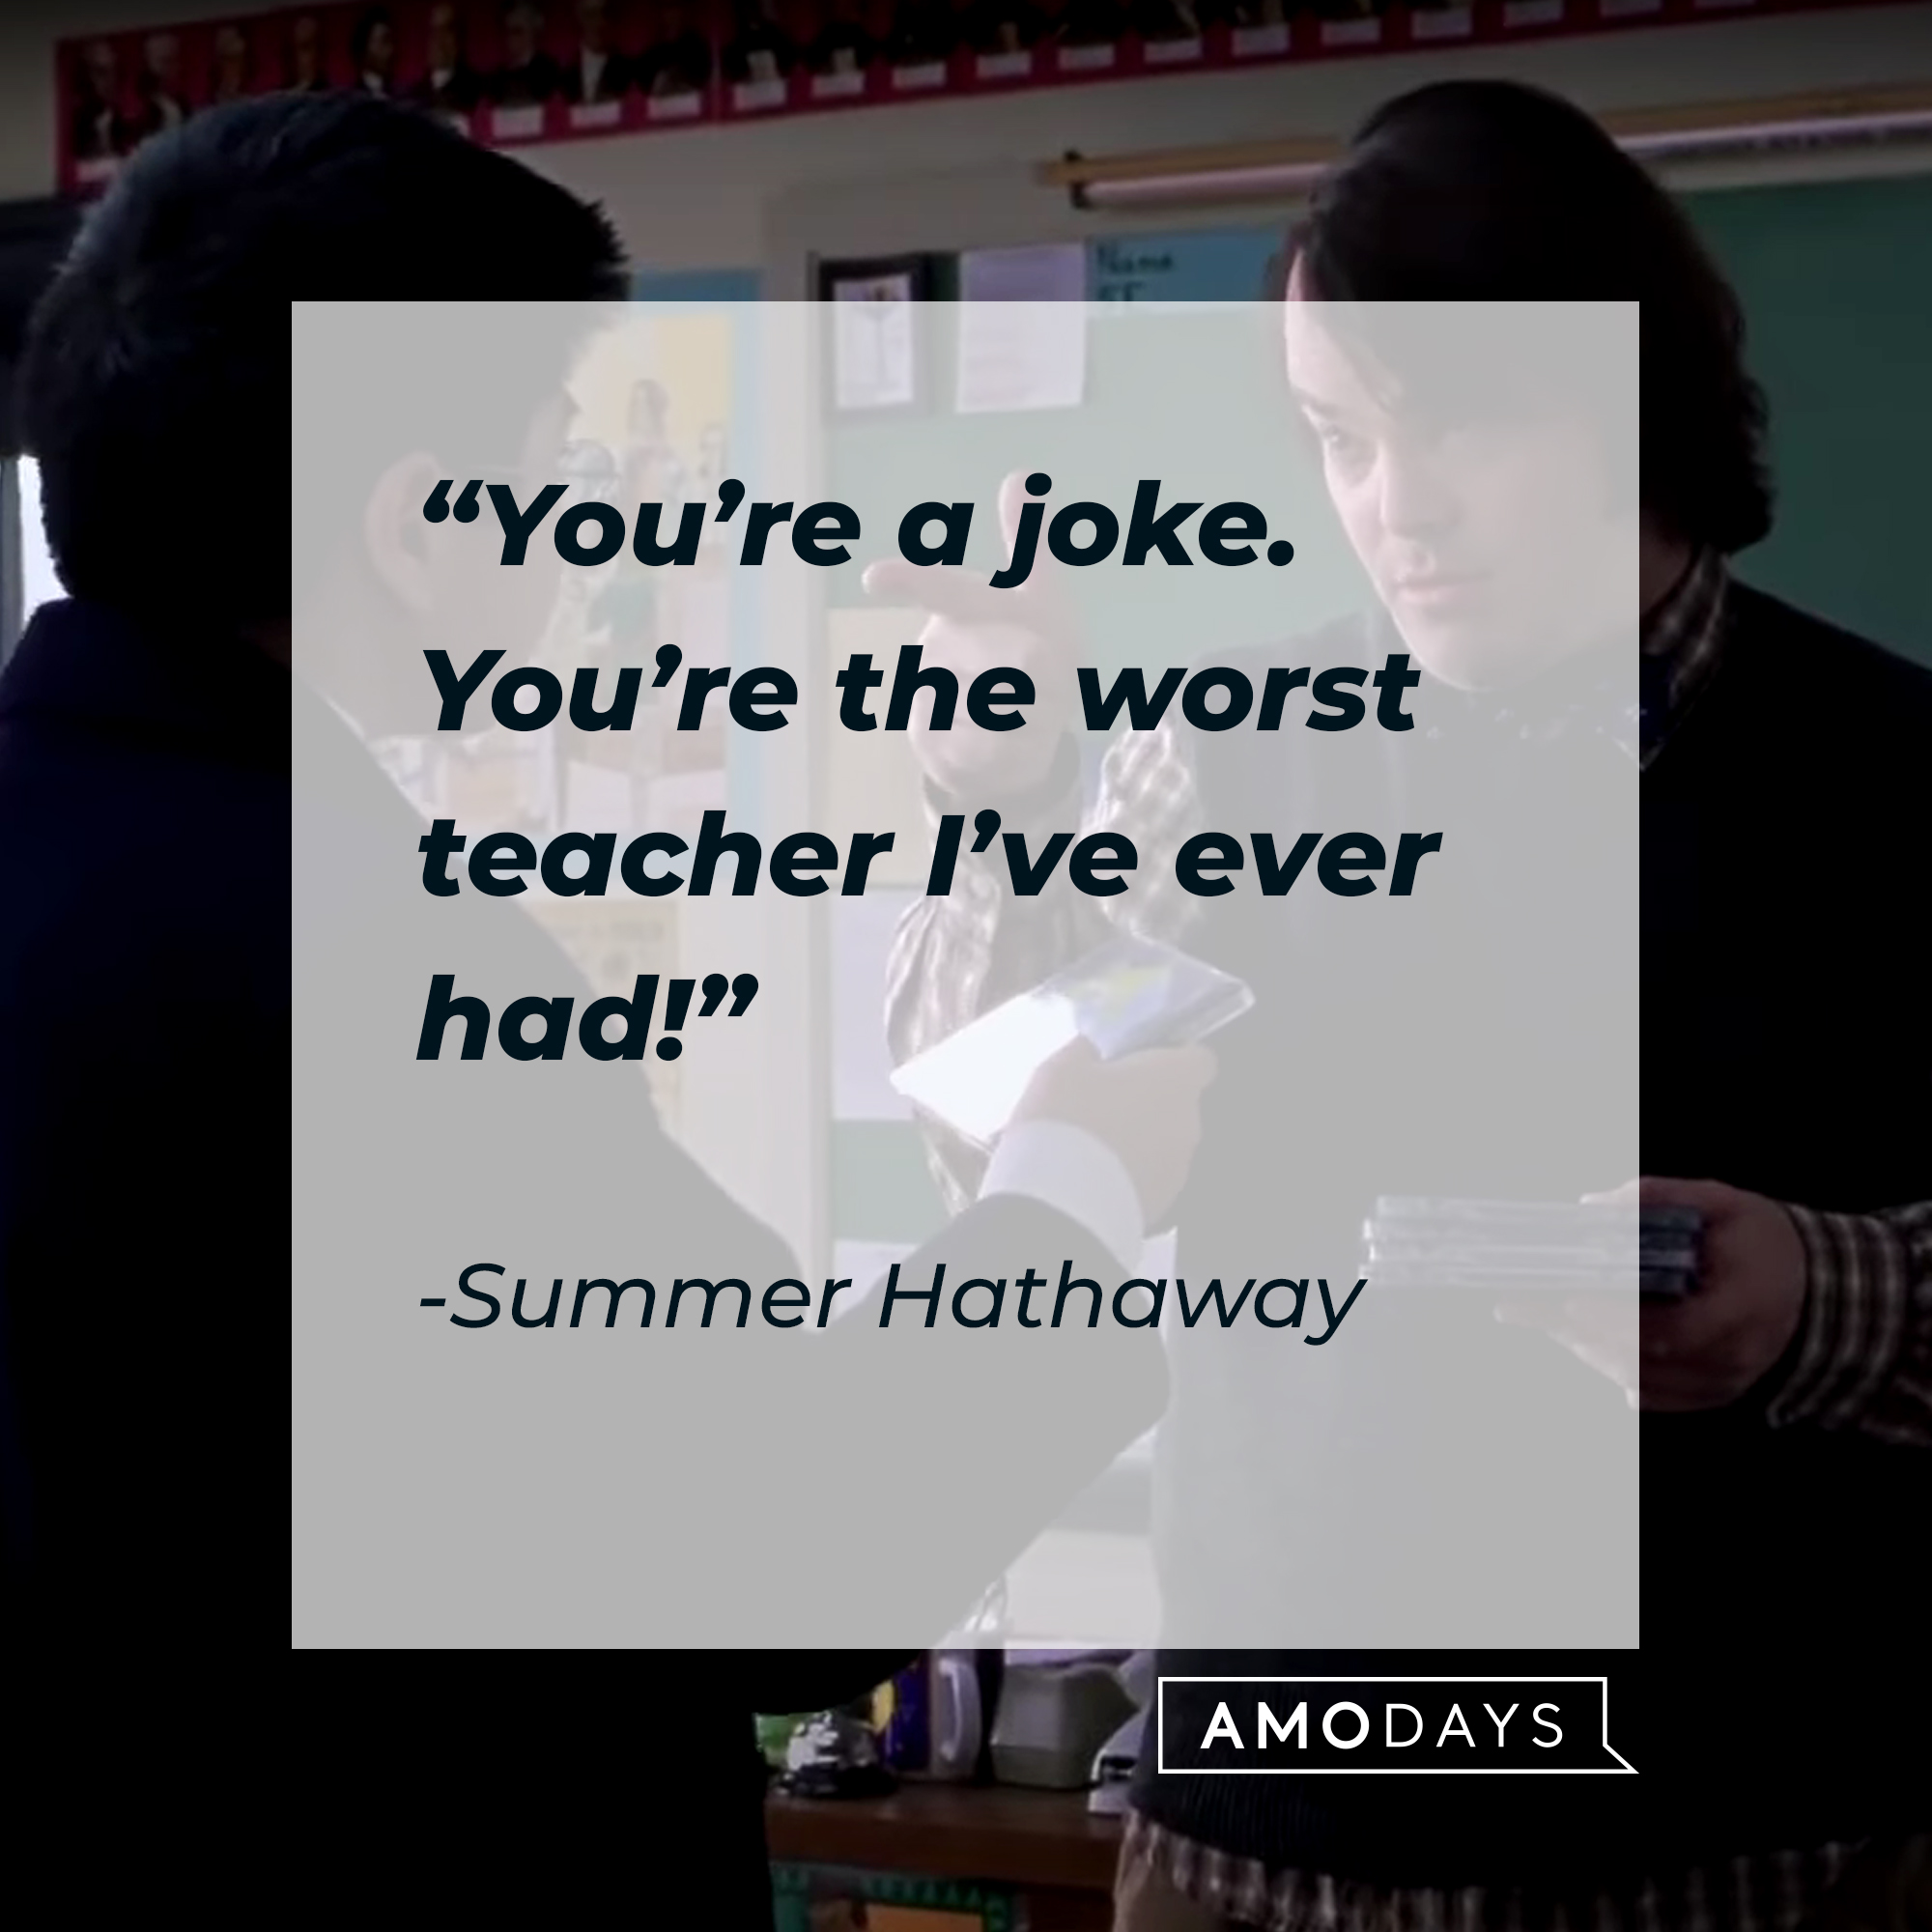 Dewey Finn, with Summer Hathaway’s quote: “You’re a joke. You’re the worst teacher I’ve ever had!” | Source: youtube.com/paramountpictures